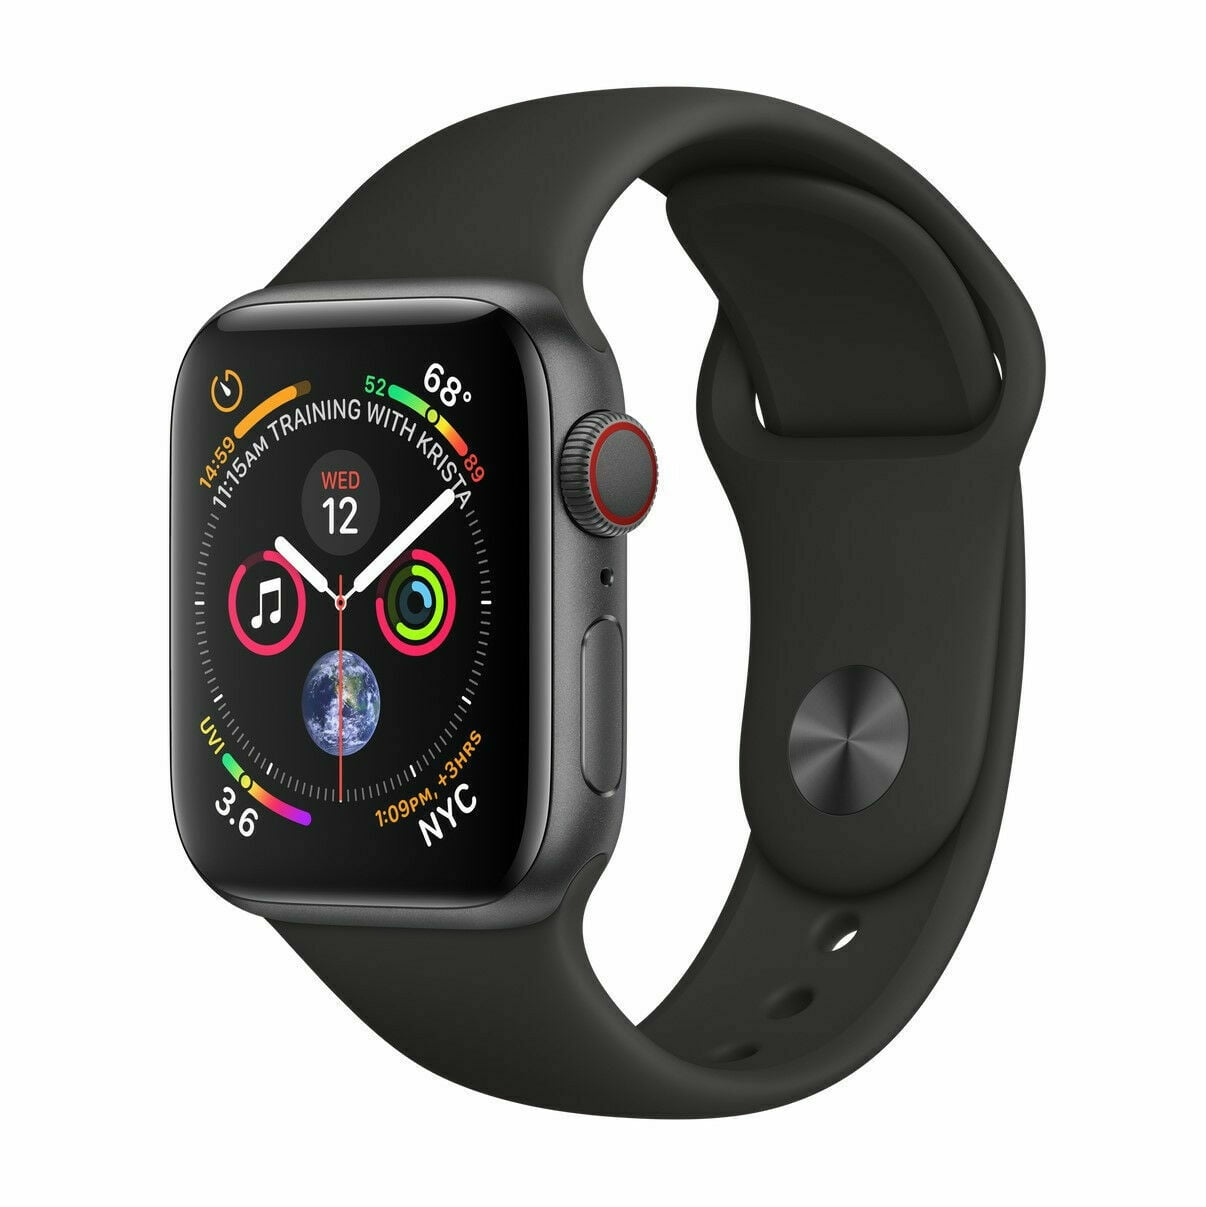 Used (Good Condition) Apple Watch Series 4 (GPS + Cellular) 44mm